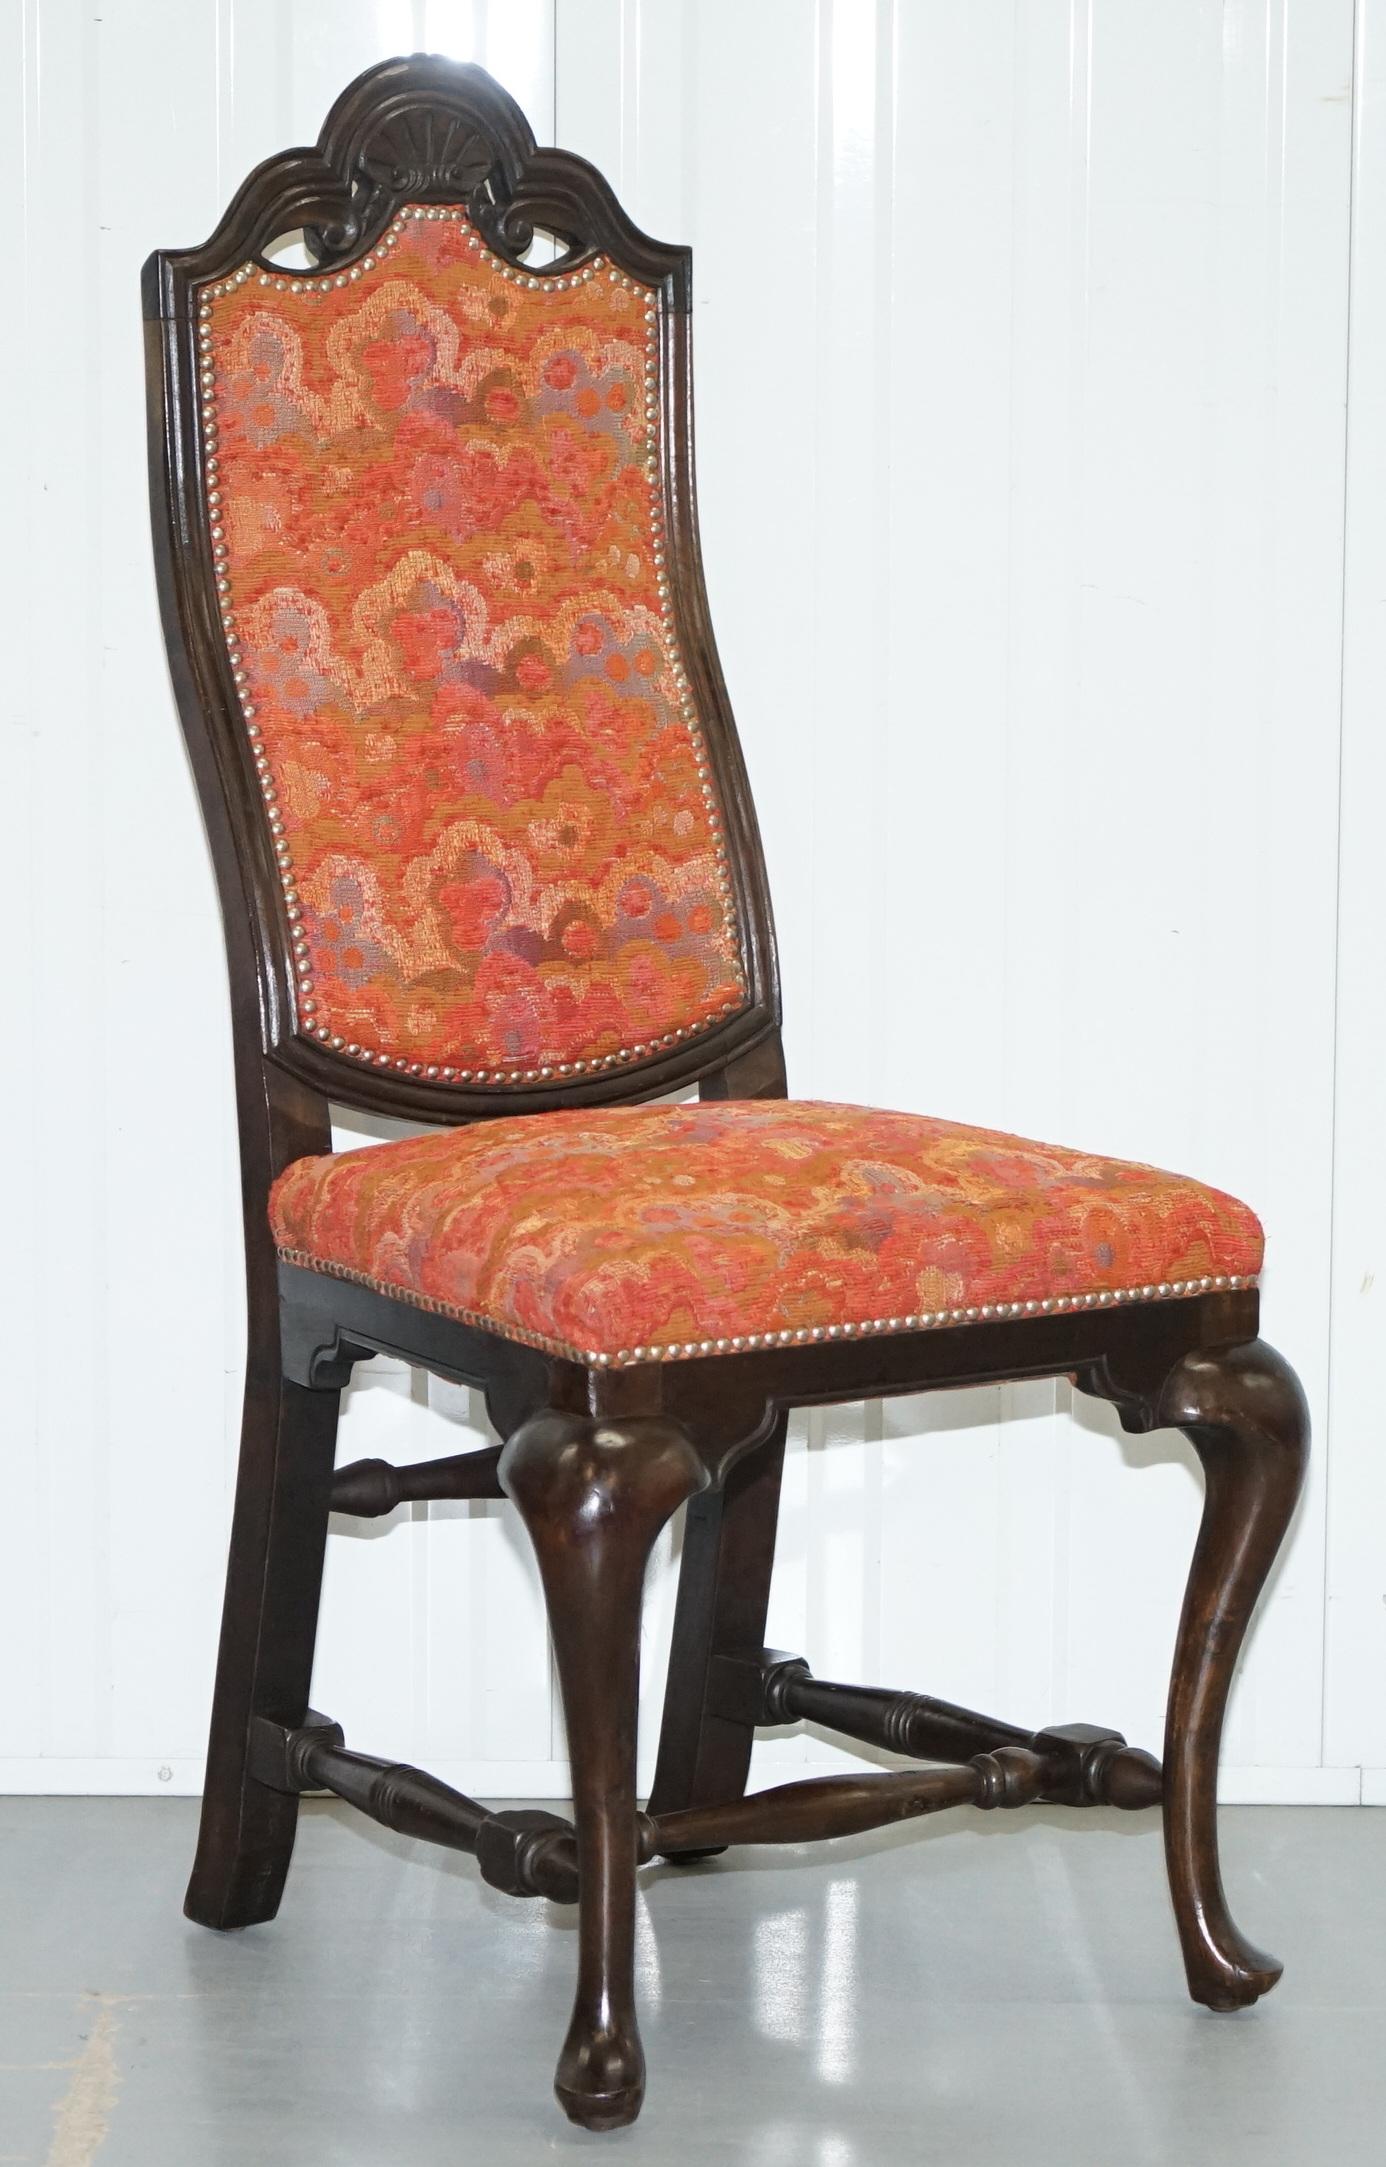 We are delighted to offer for sale this stunning set of eight original House of Spain inc vintage dining chairs

A very good looking comfortable and decorative set of chairs, you almost never find House of Spain furniture in the UK, to buy these